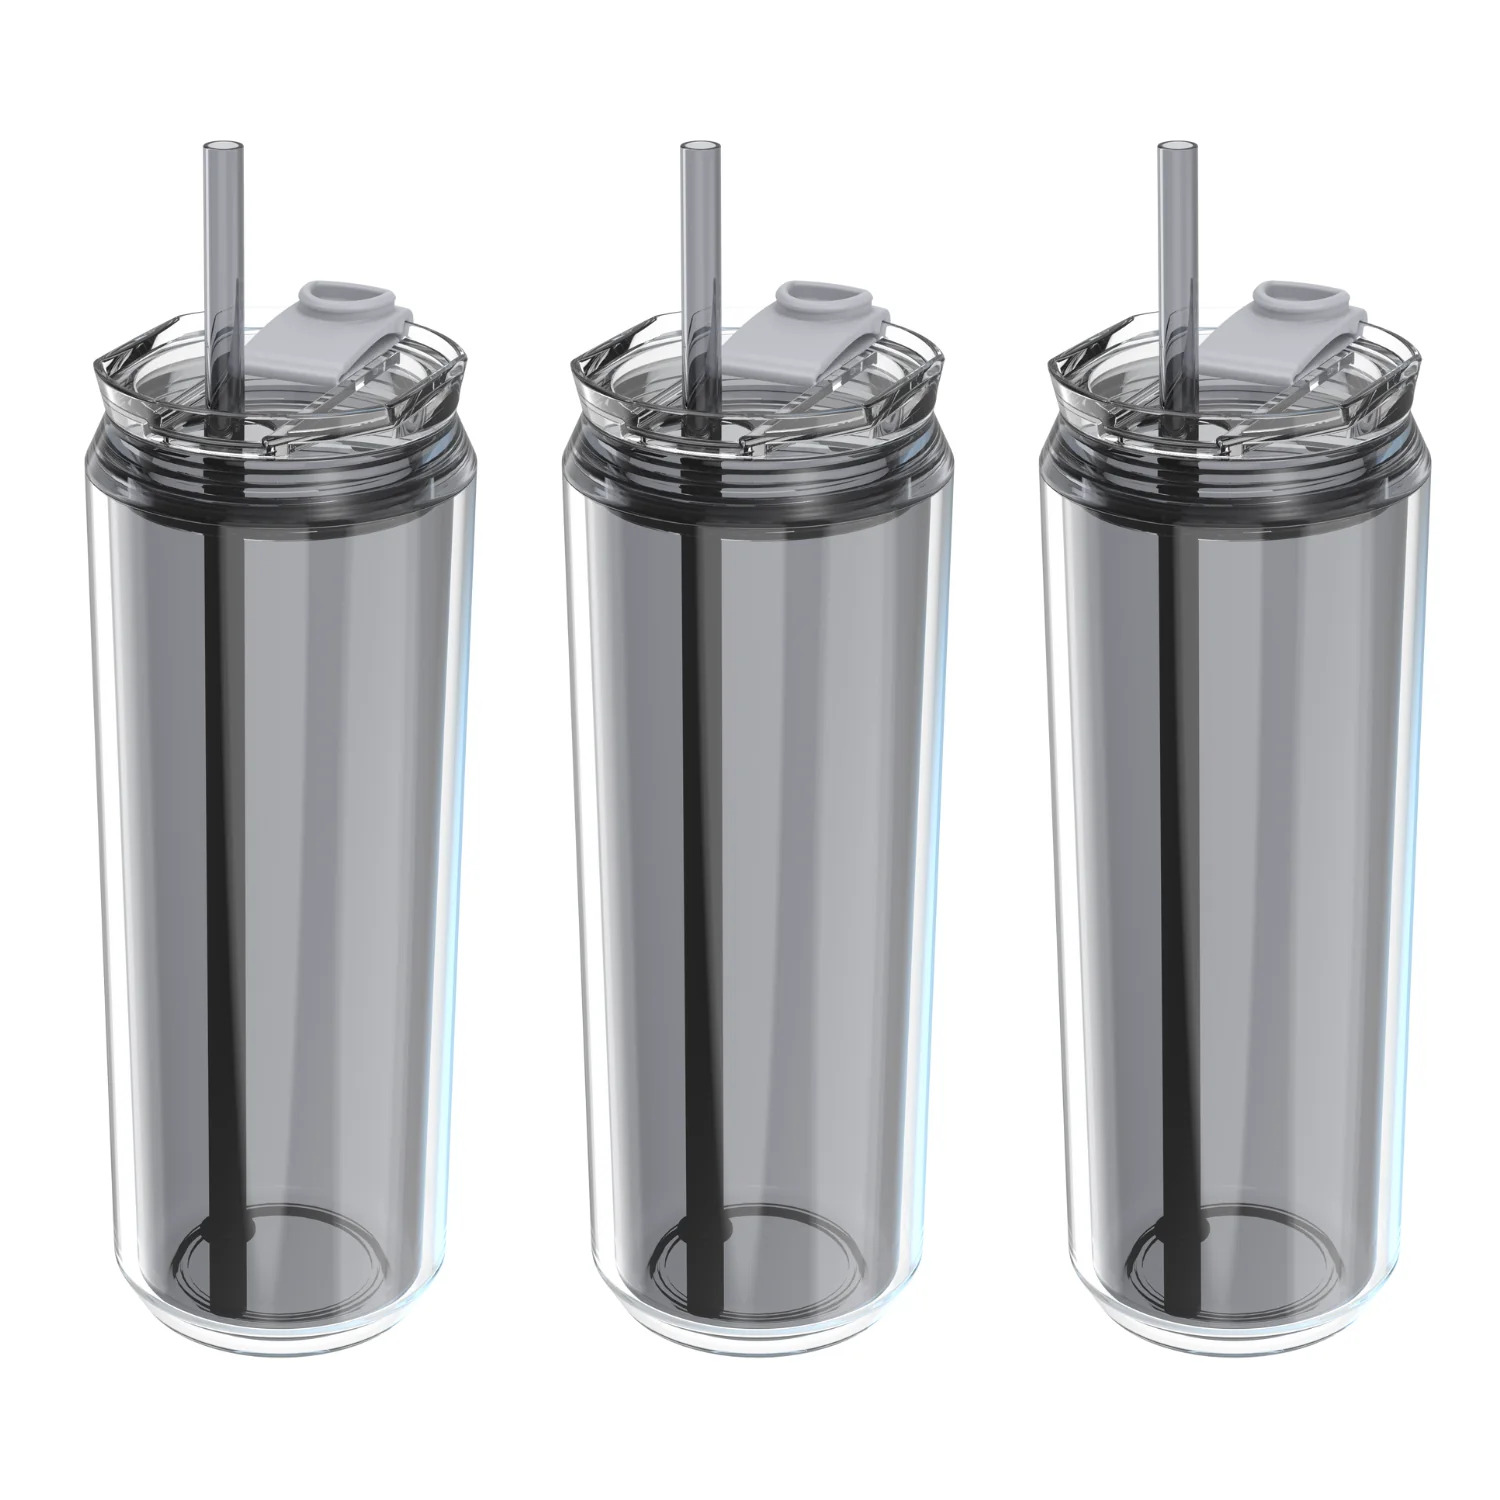 Cool Gear 3-Pack Modern Tumbler with Reusable Straw | Dishwasher Safe, Cup Holder Friendly, Spillproof, Double-Wall Insulated Travel Tumbler | Solid Cool Grey Pack - image 1 of 2